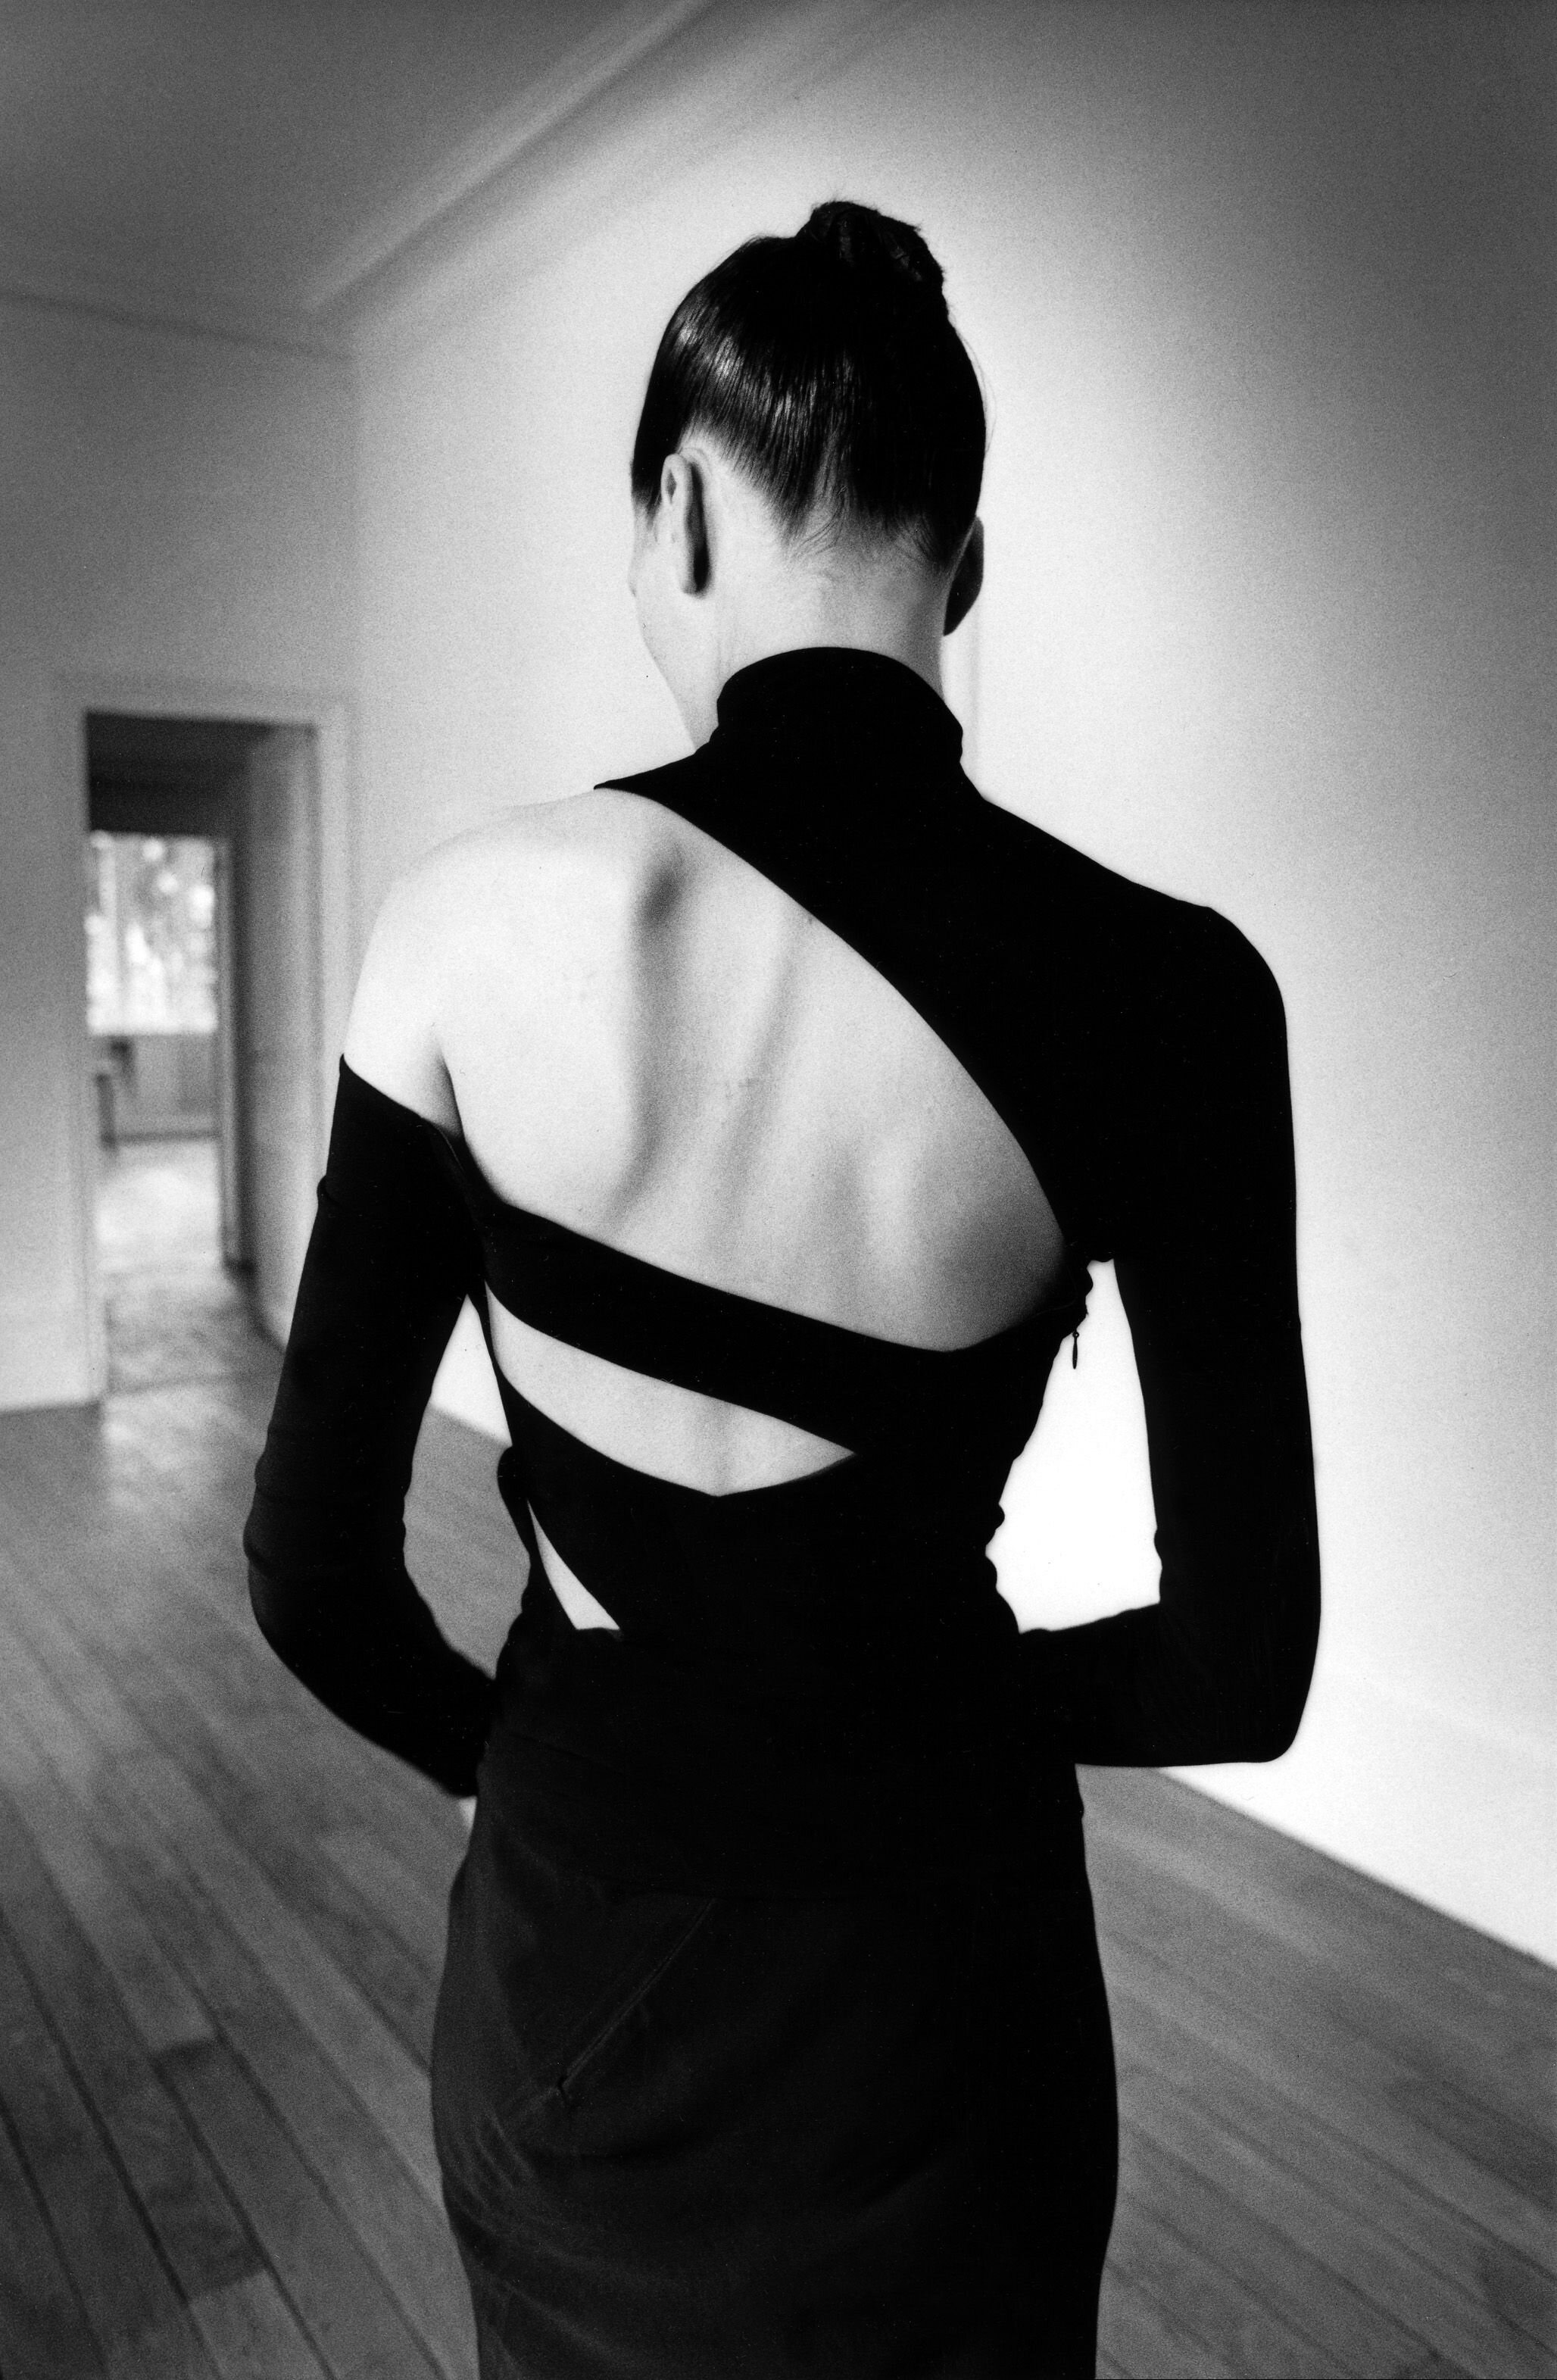  Jeanloup Sieff, Eve from behind, Kim Islinski [Top and skirt Martine Sitbon, published in New York,1997] © Estate of Jeanloup Sieff 